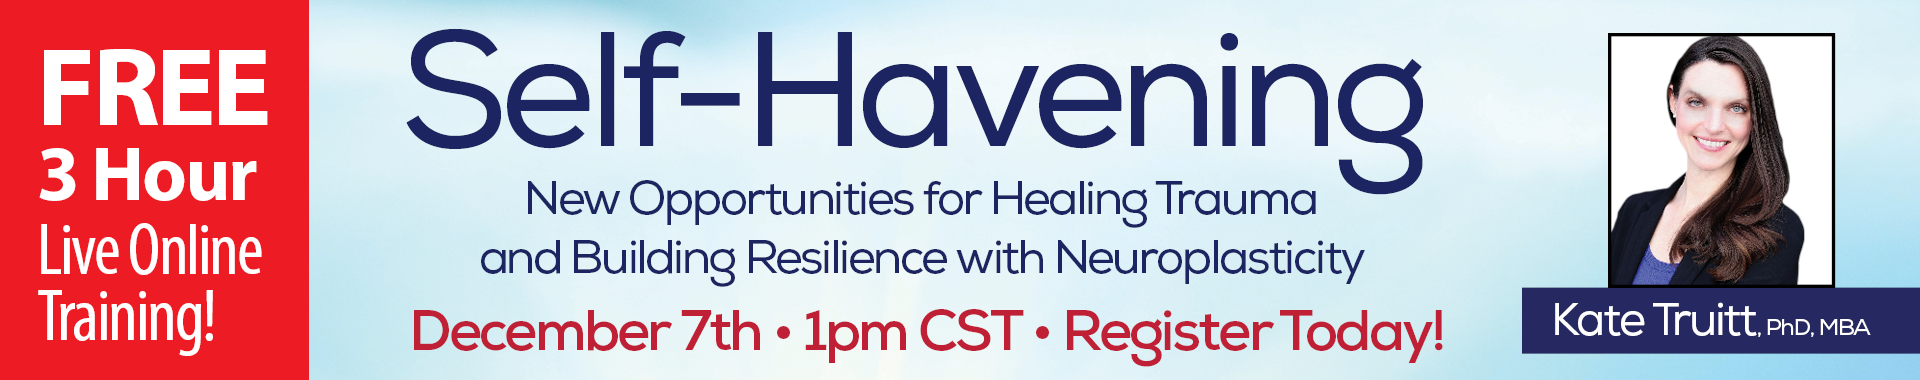 Self-Havening: New Opportunities for Healing Trauma and Building Resilience with Neuroplasticity